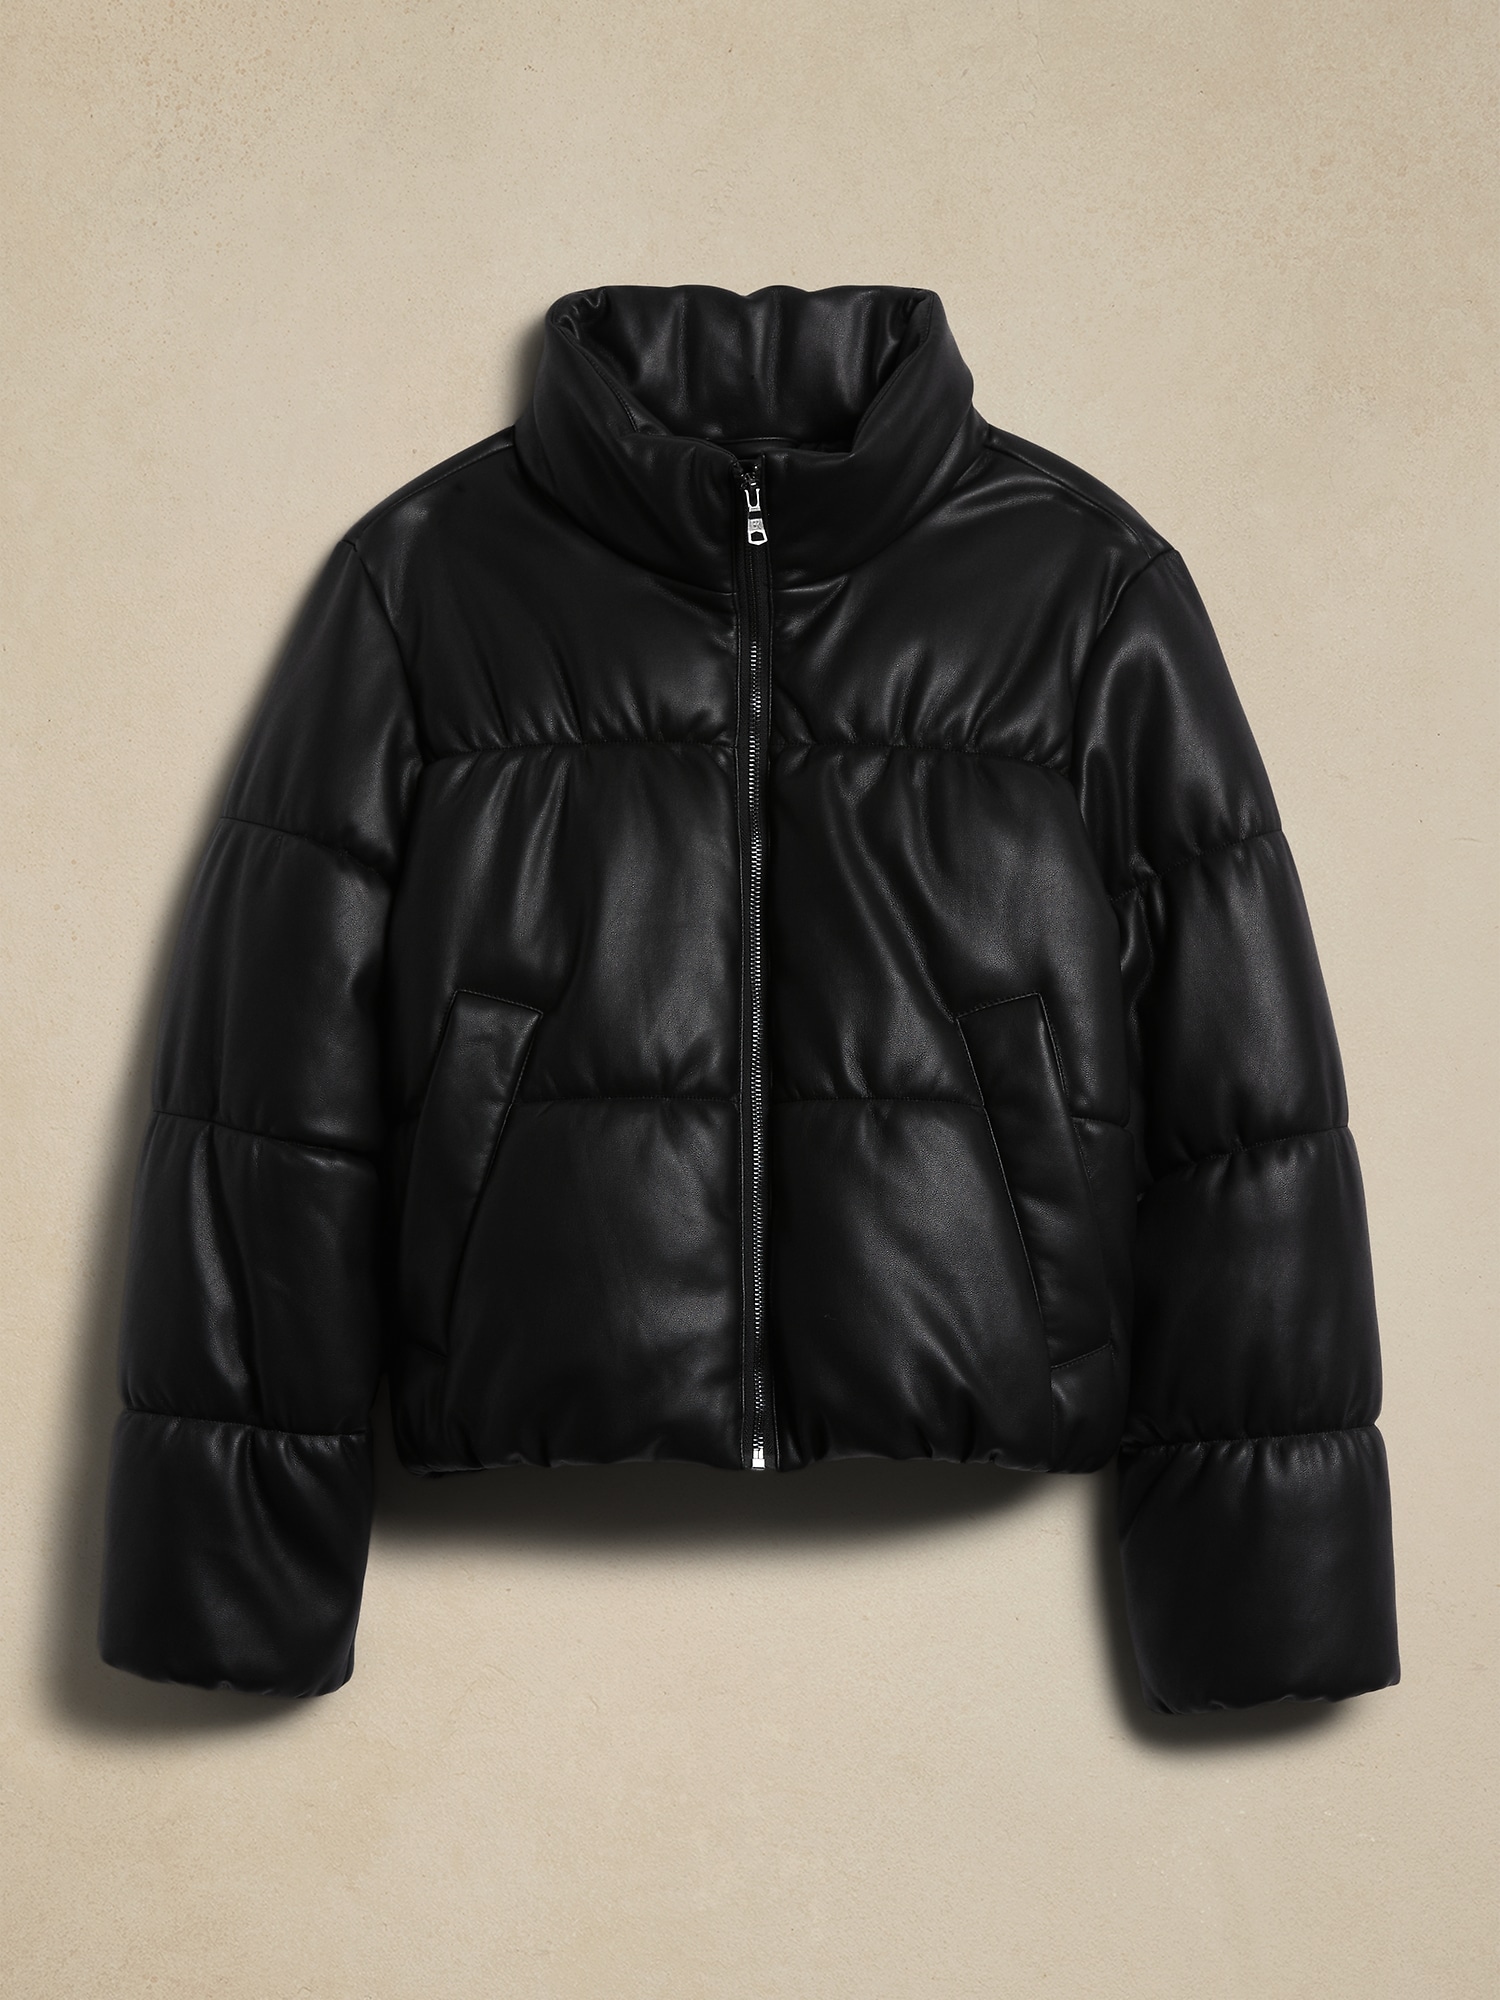 Buy IVL Collective Faux Leather Puffer Jacket online